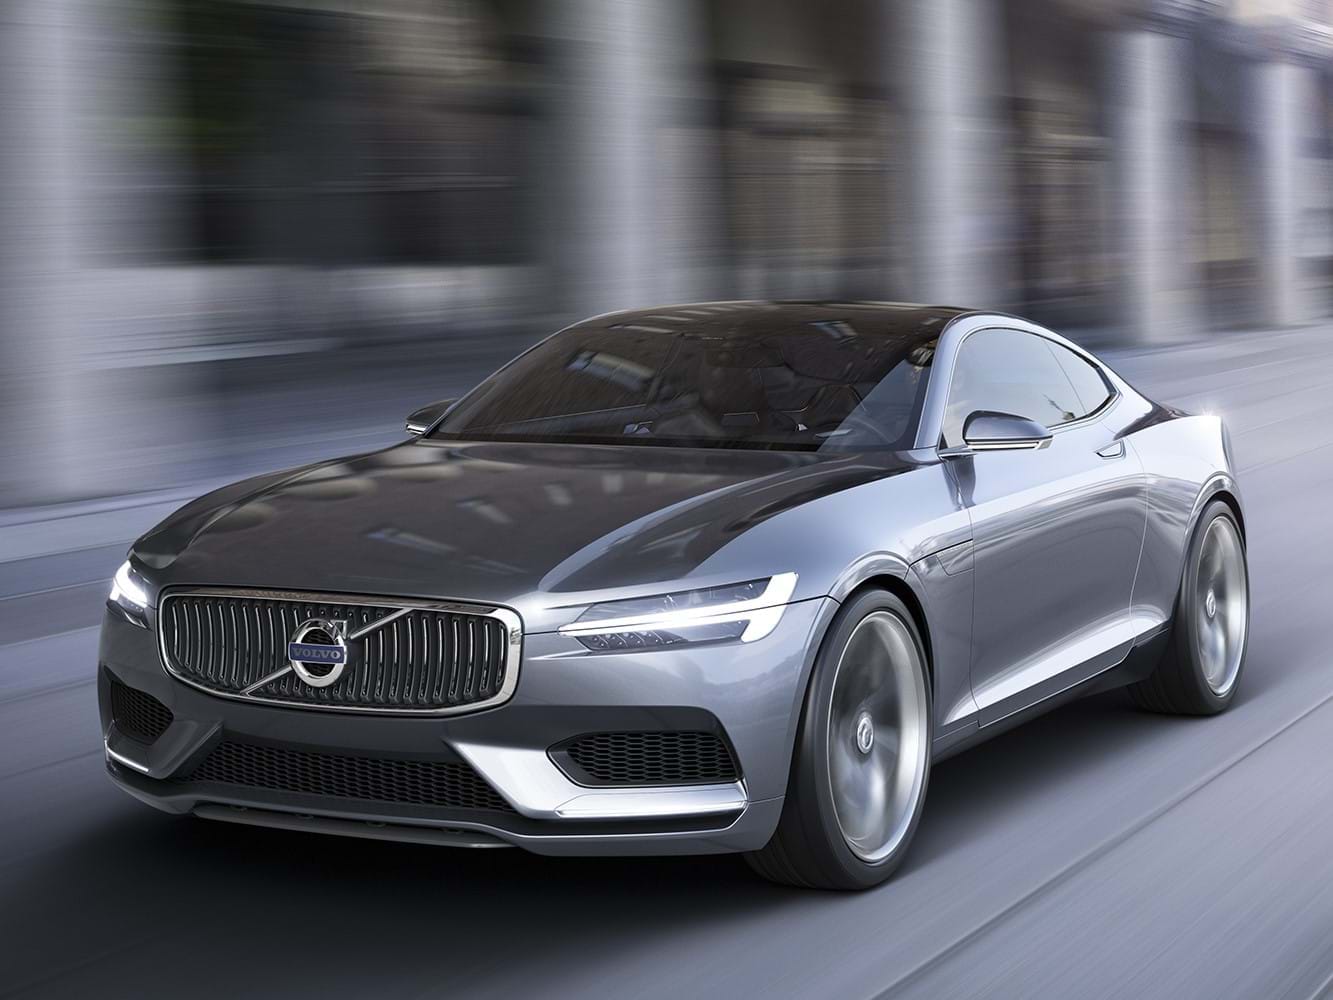 The Volvo Concept Coupe drives down a city street